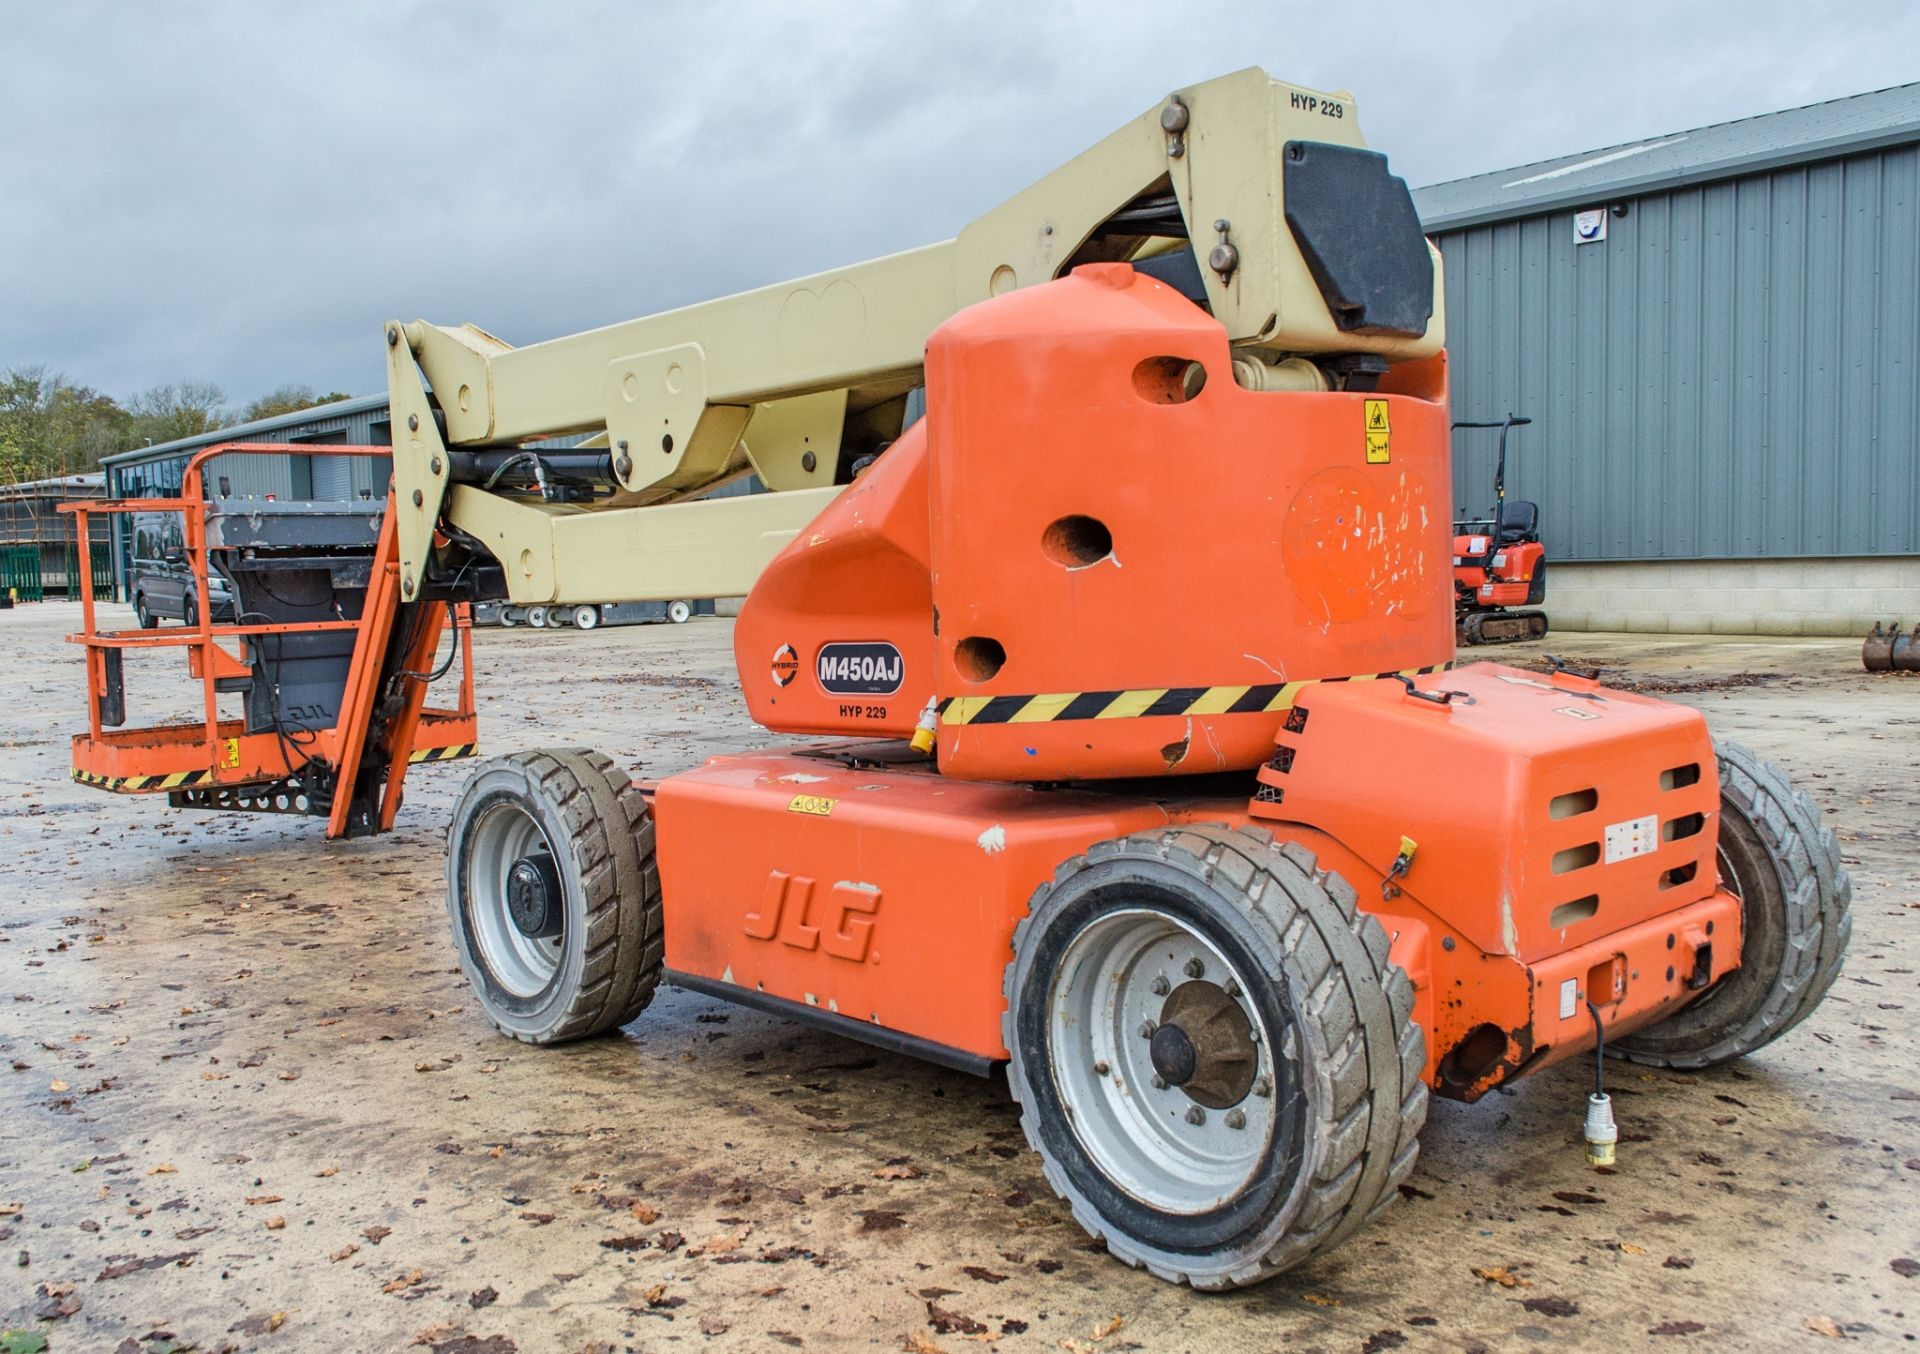 JLG M450AJ hybrid articulated boom lift Year: 2012 S/N: 156095 Recorded hours: 8 (Suspect clock - Image 4 of 17